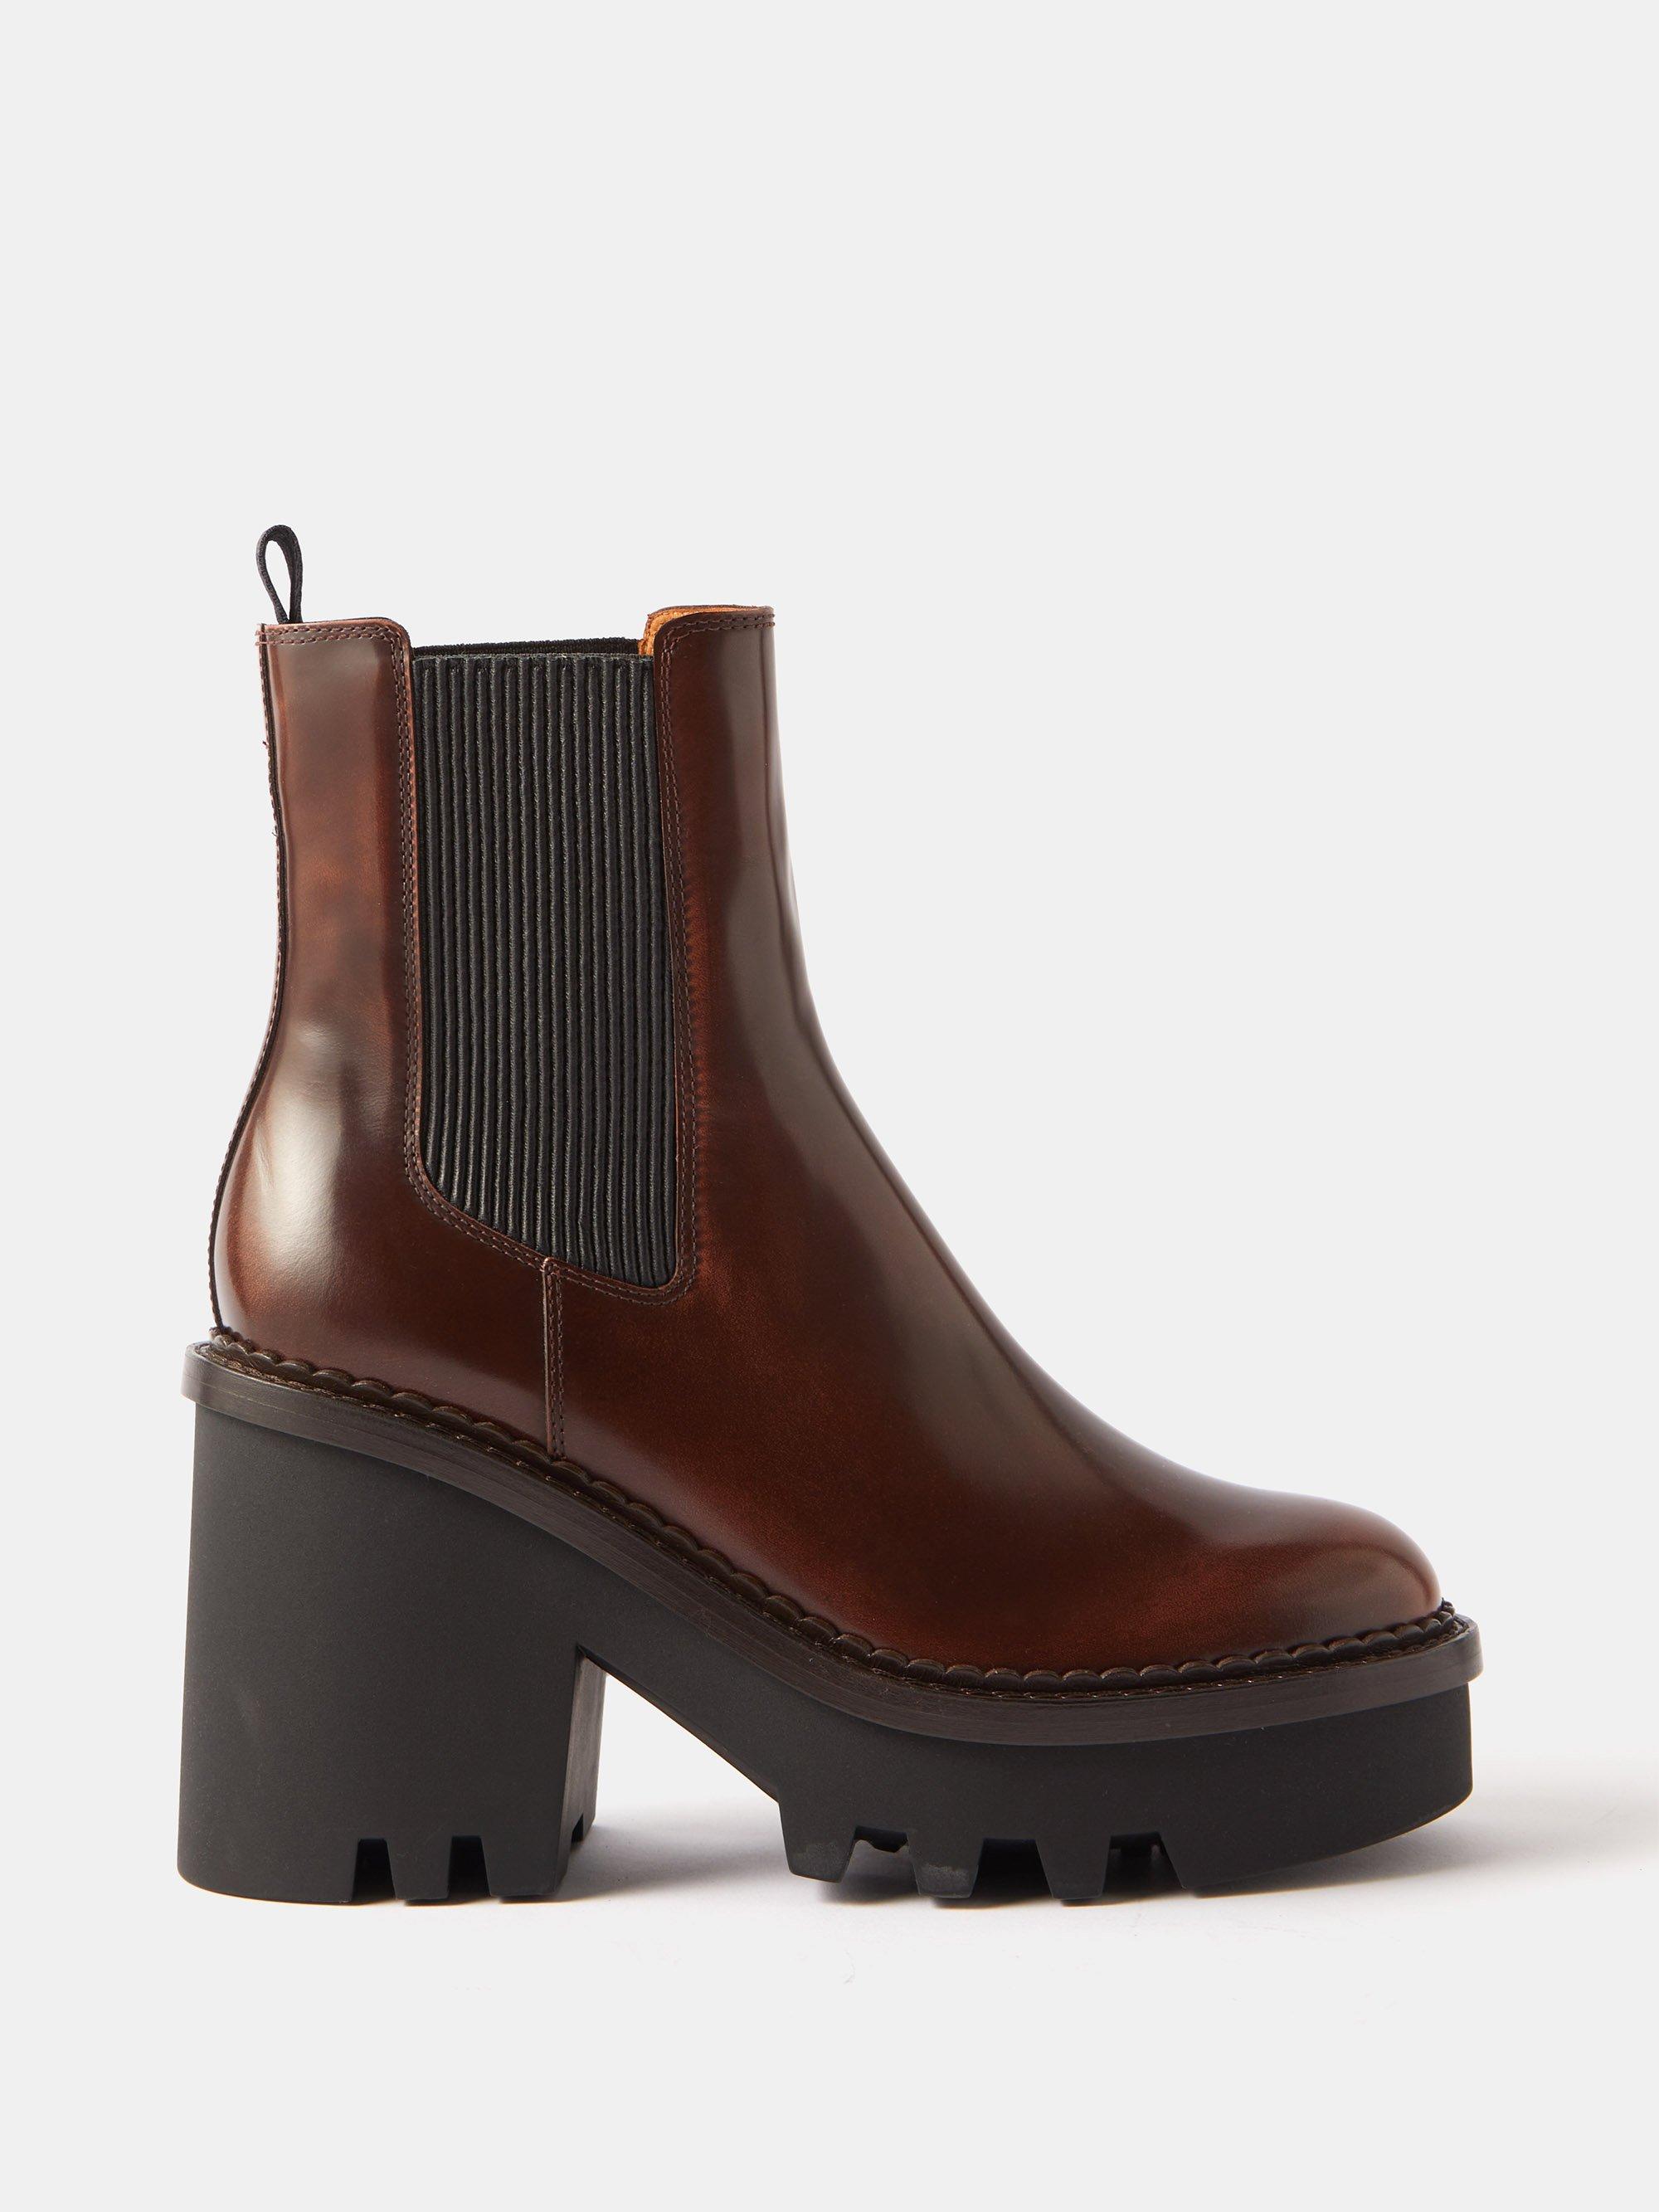 Chloé Owena Leather Chelsea Boots in Brown | Lyst